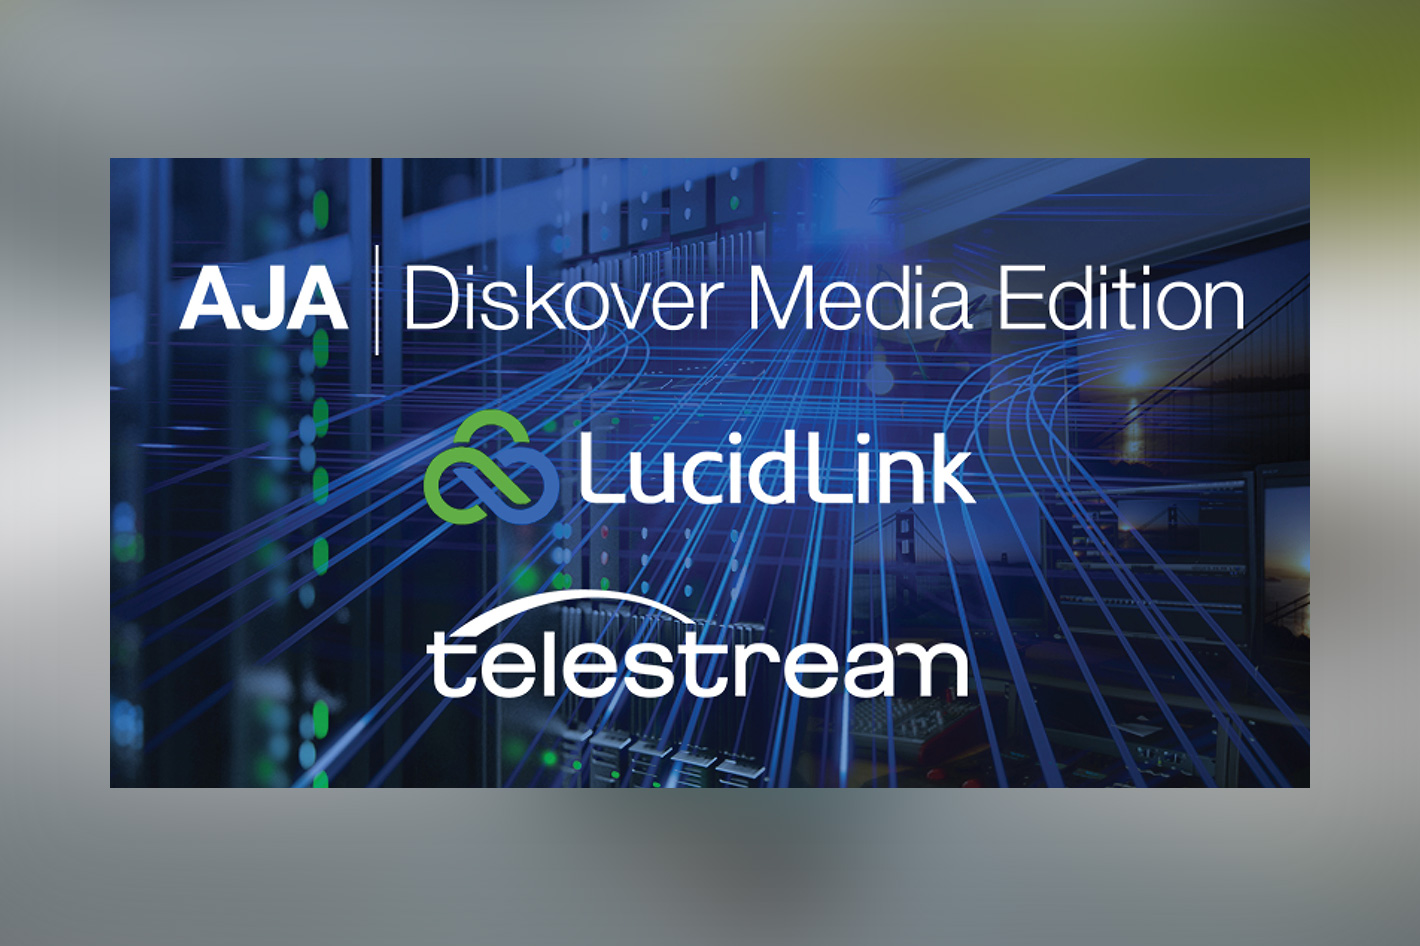 IBC2022: discover a fast and easy workflow for Media & Entertainment